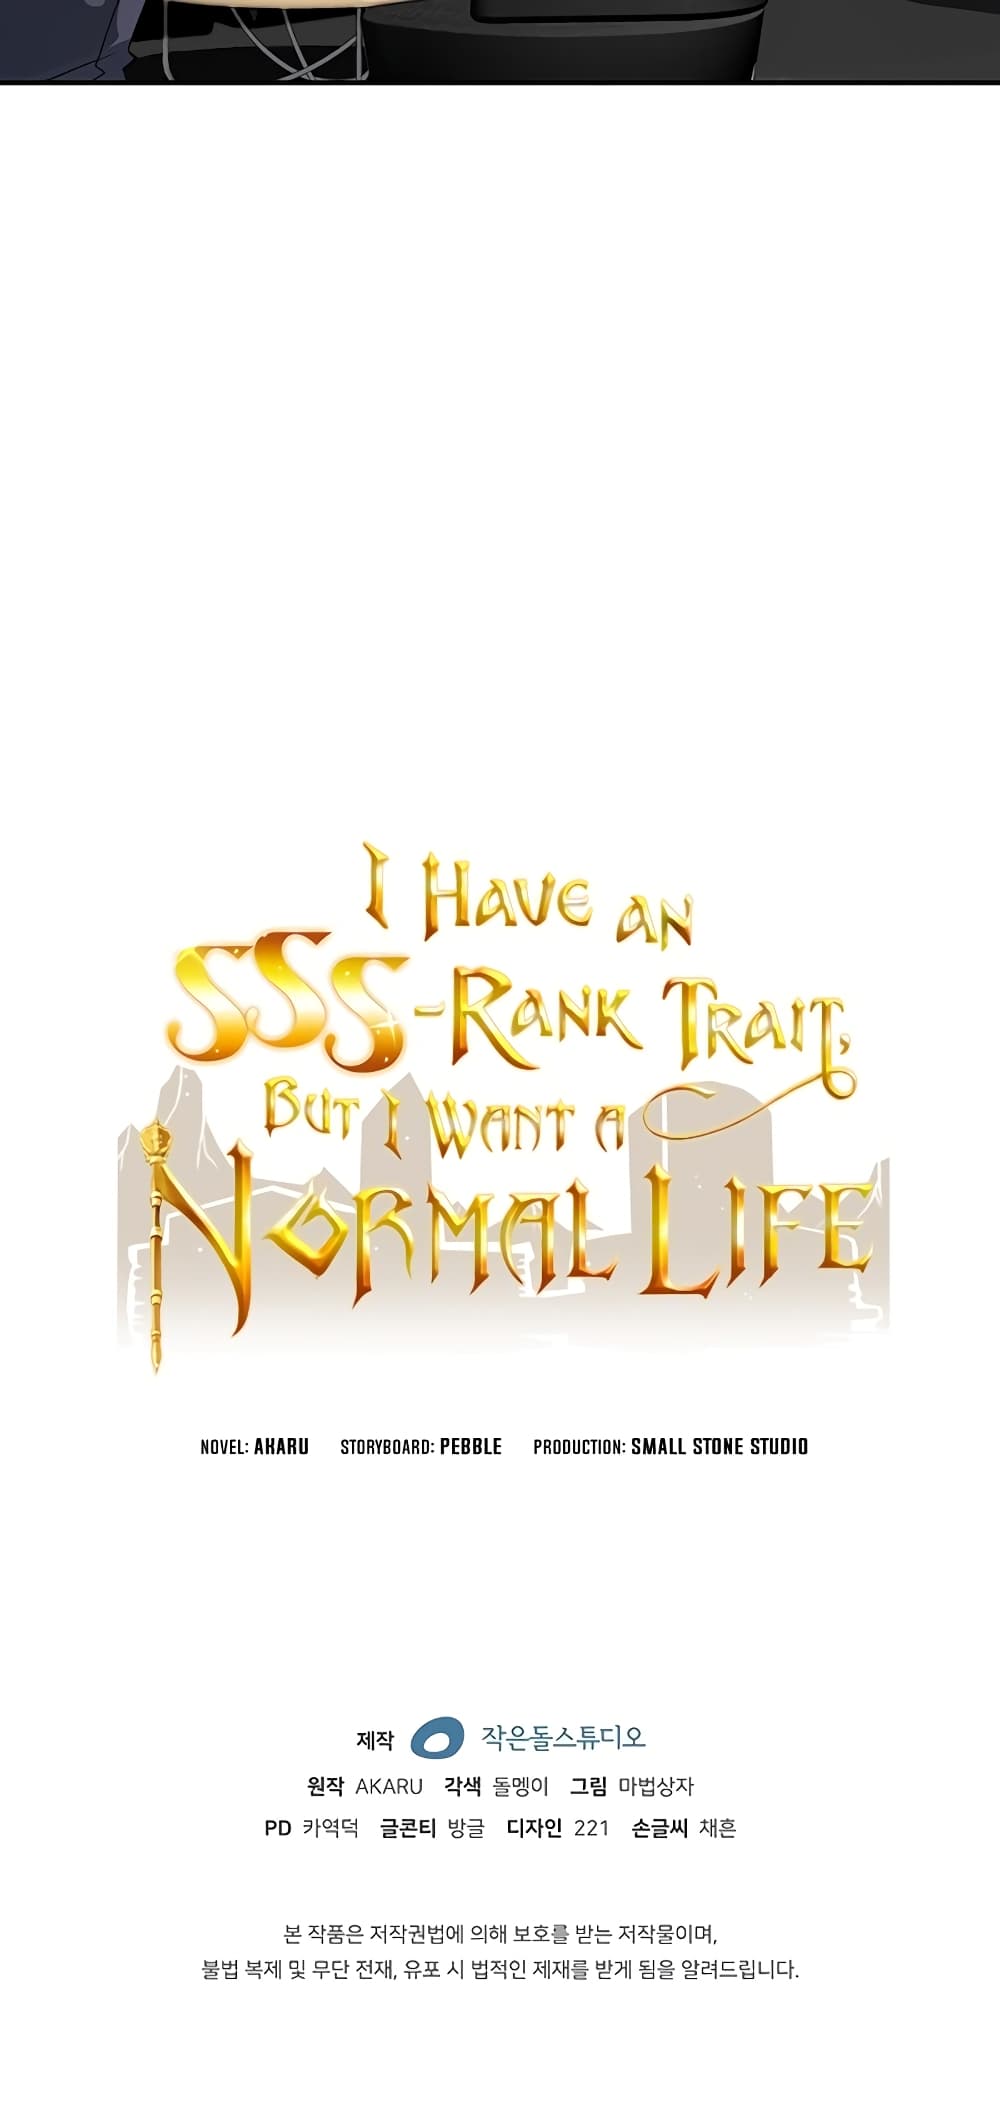 I Have an SSS-Rank Trait, But I Want a Normal Life 5-5